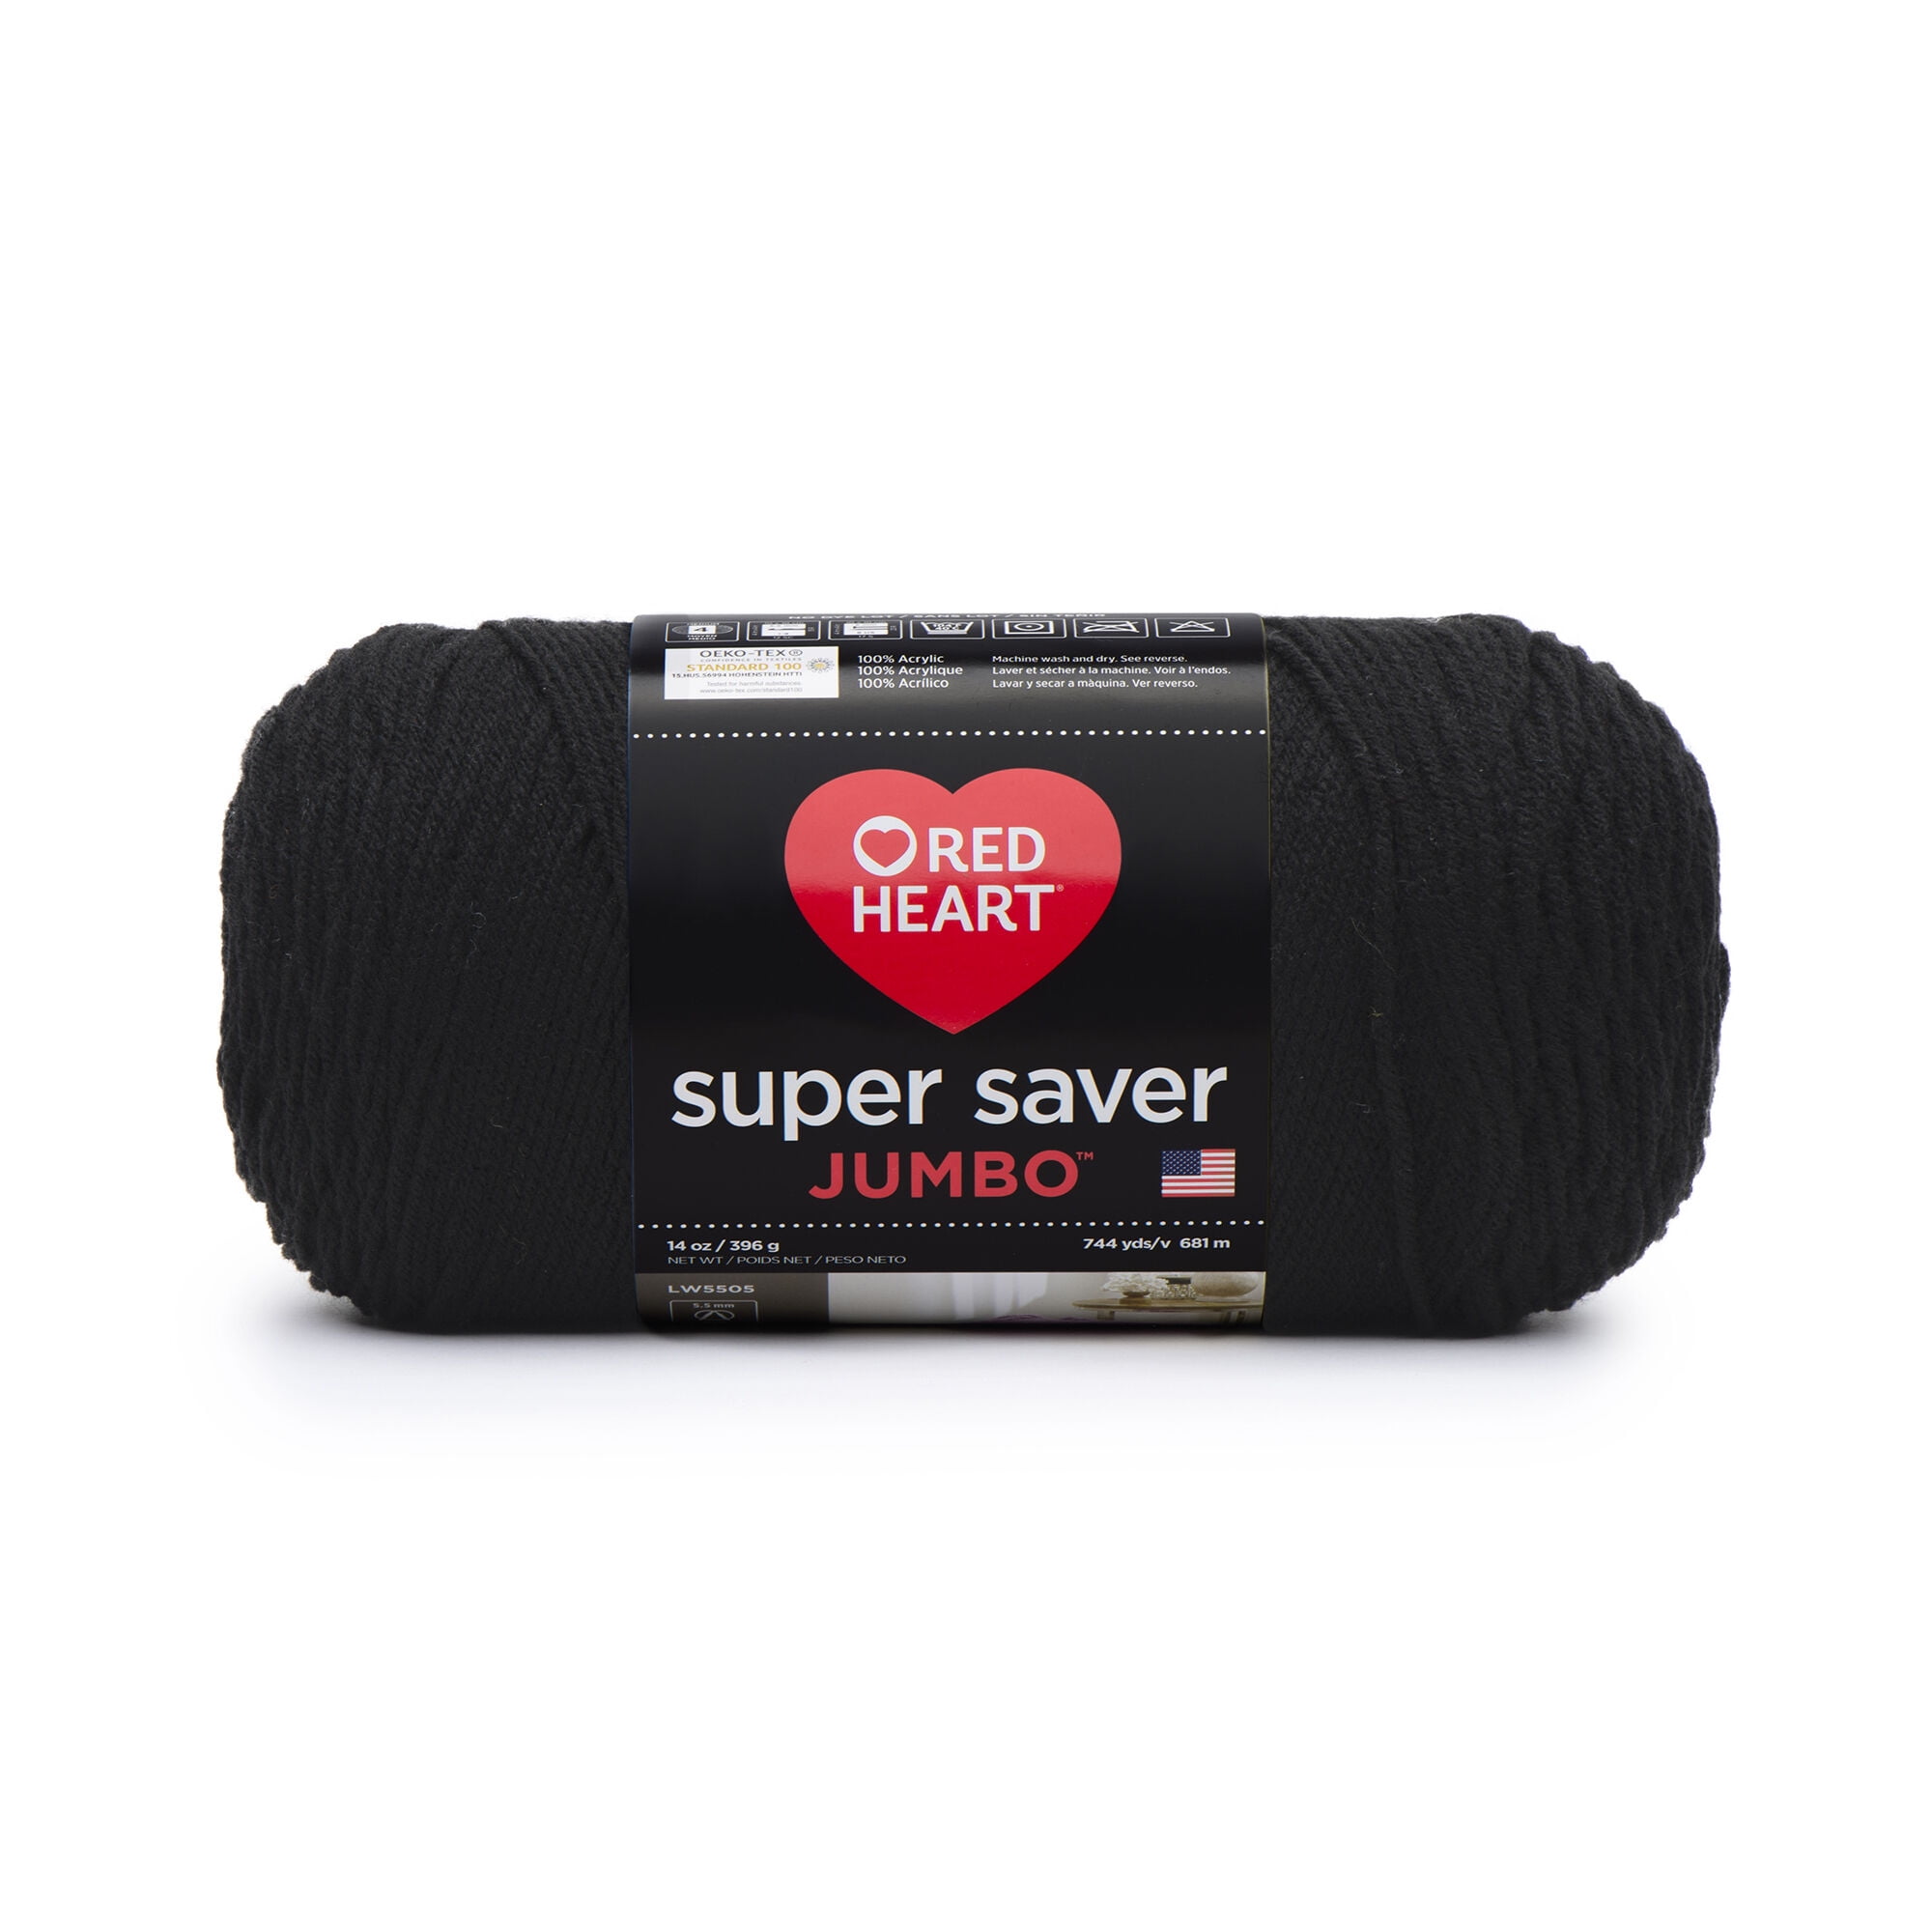 Red Heart Multipack of 6 Black With Love Yarn 